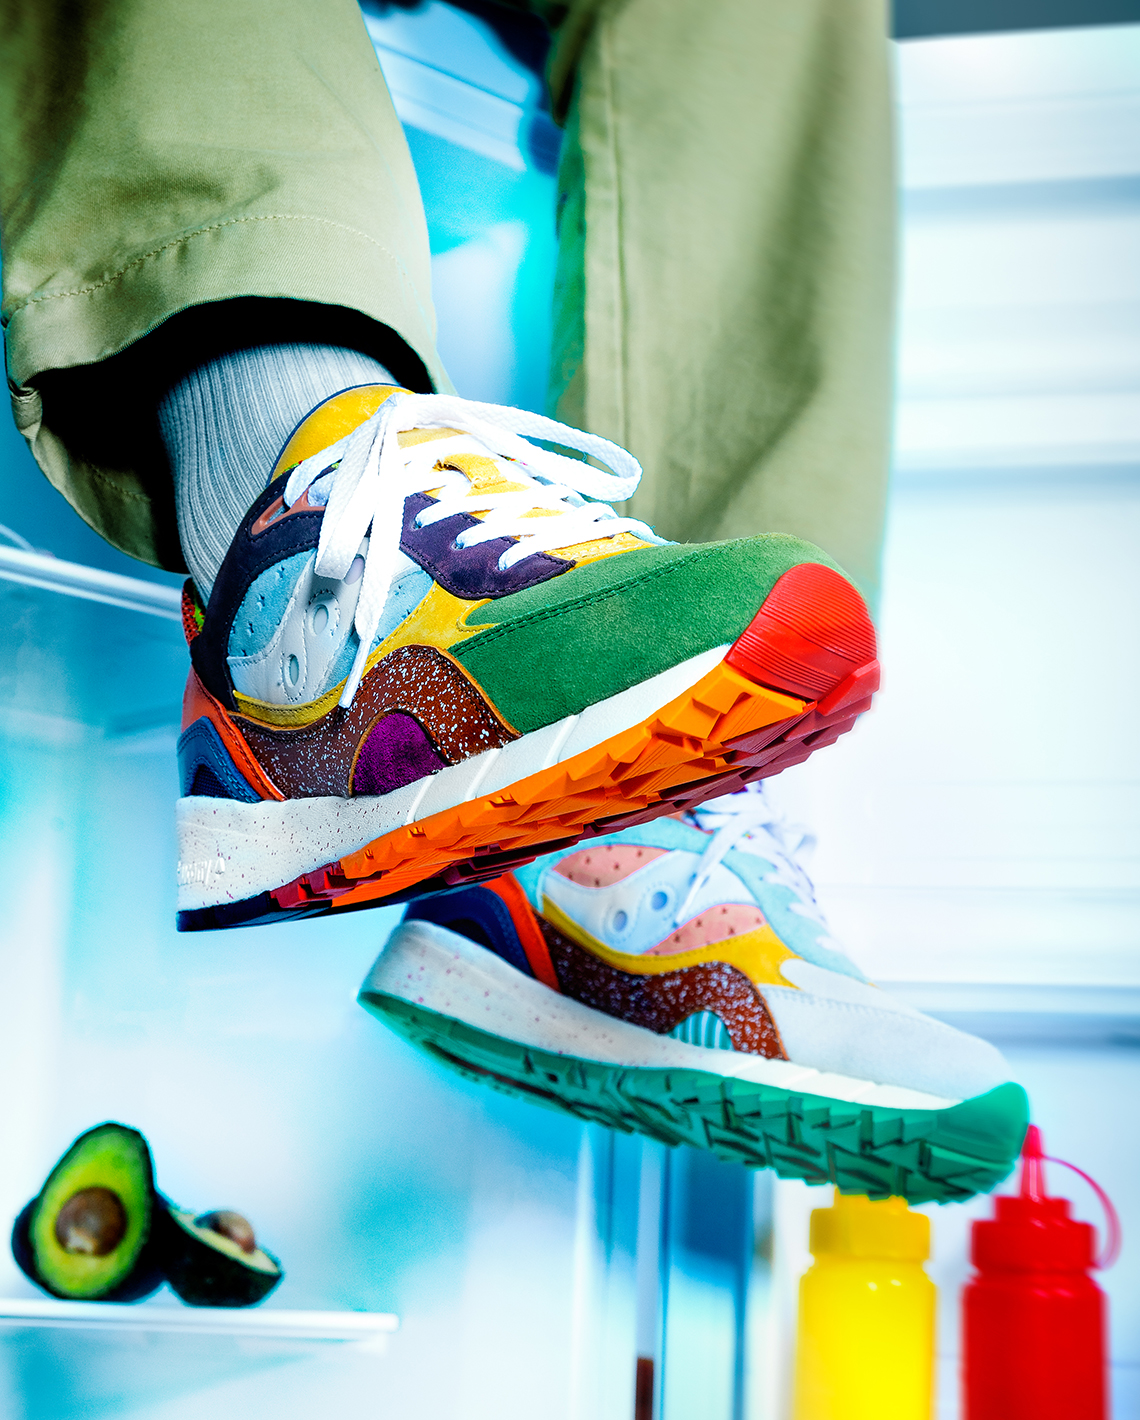 Saucony Shadow 6000 Foodfight S70595 1 Release Date 6